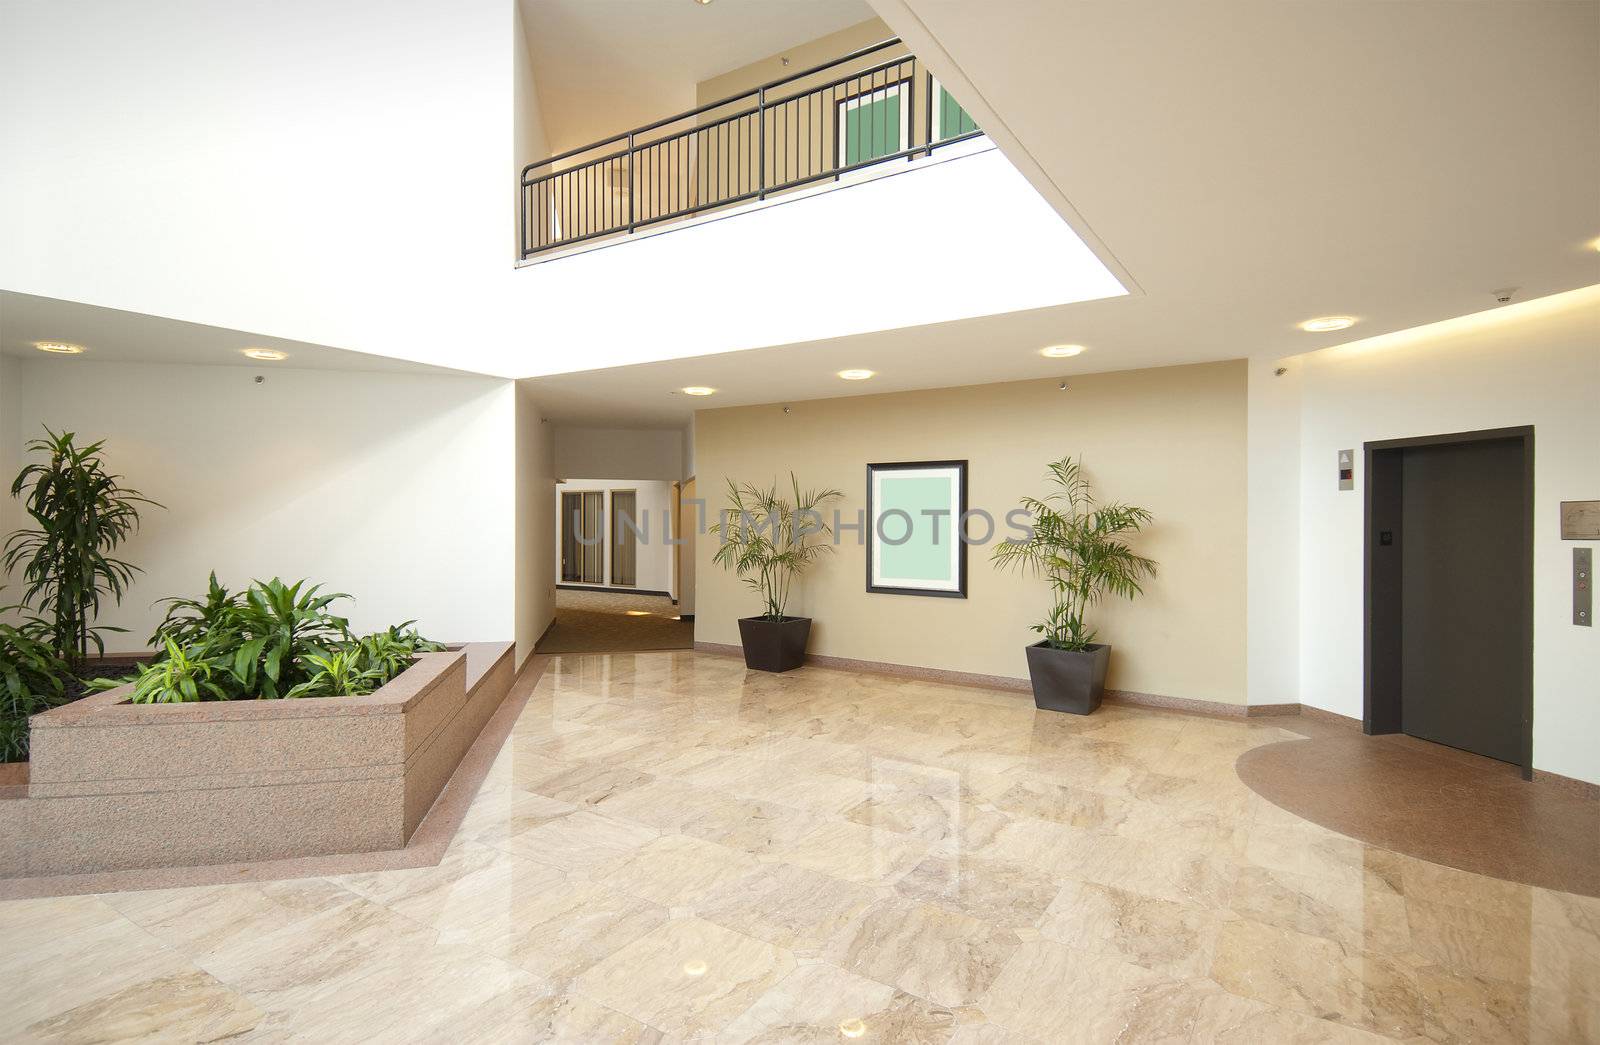 office building lobby in white and beige with marble floors